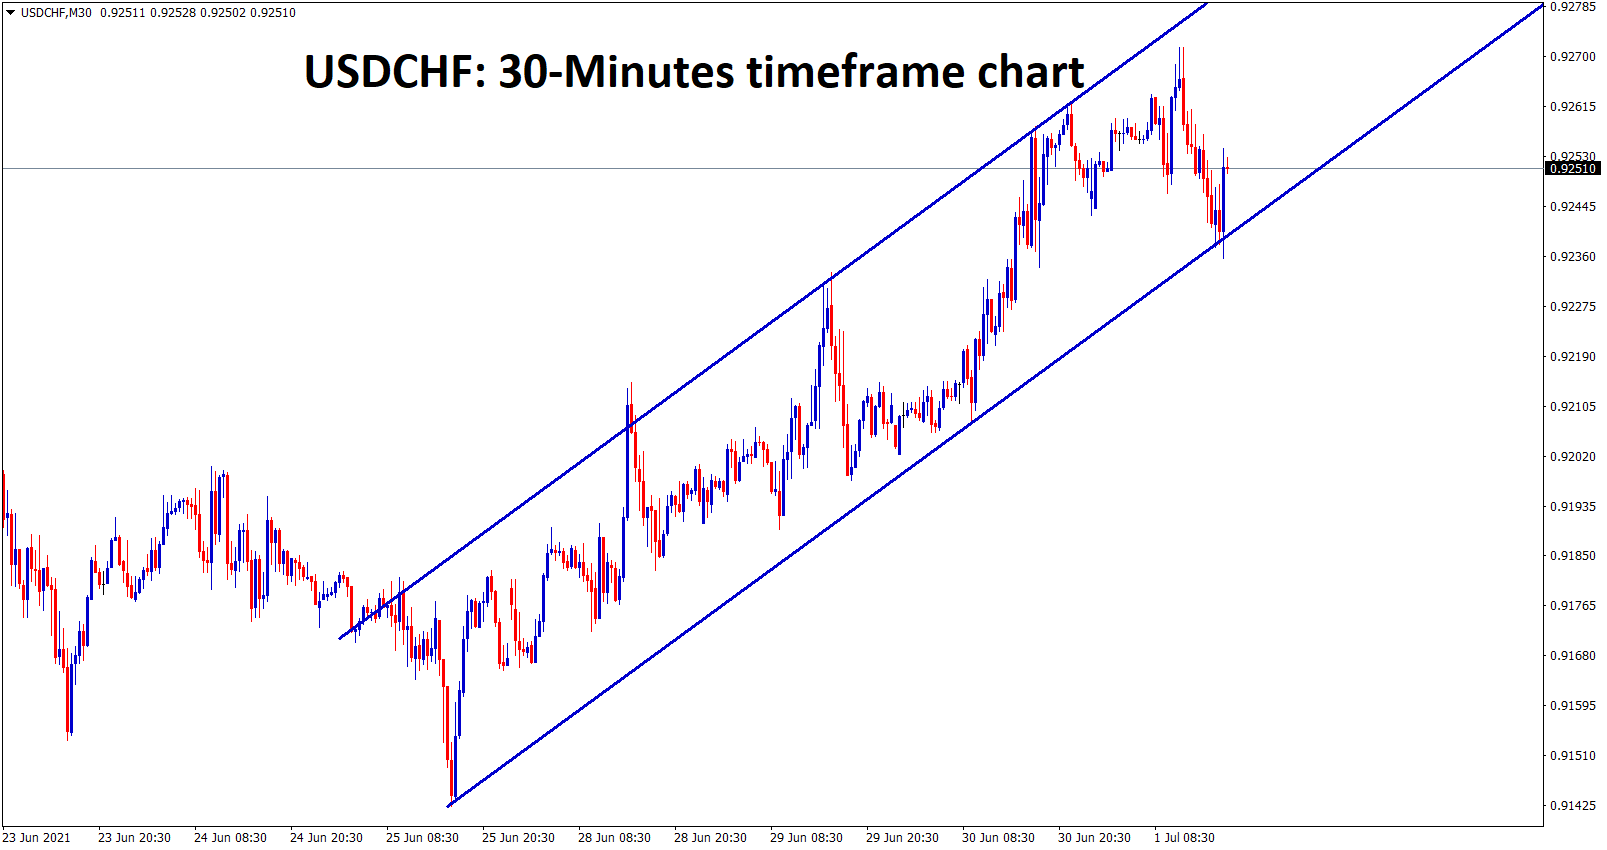 USDCHF is moving in an Ascending channel forming higher highs and higher lows